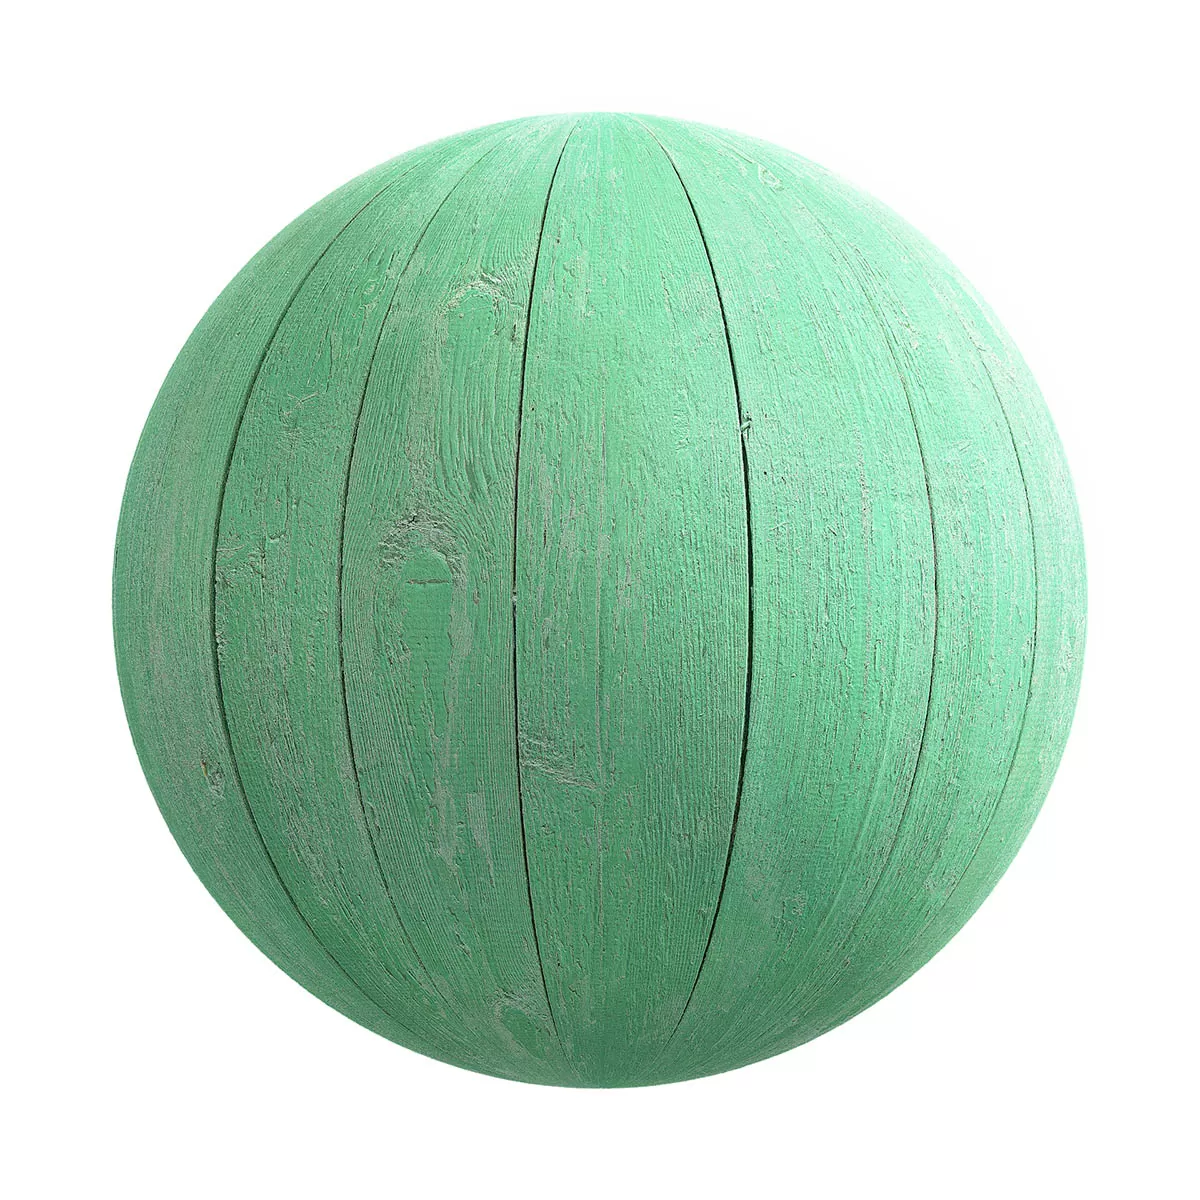 CGAxis PRB 18 – Green Painted Wooden Planks Pbr 59 – 4K – 8K